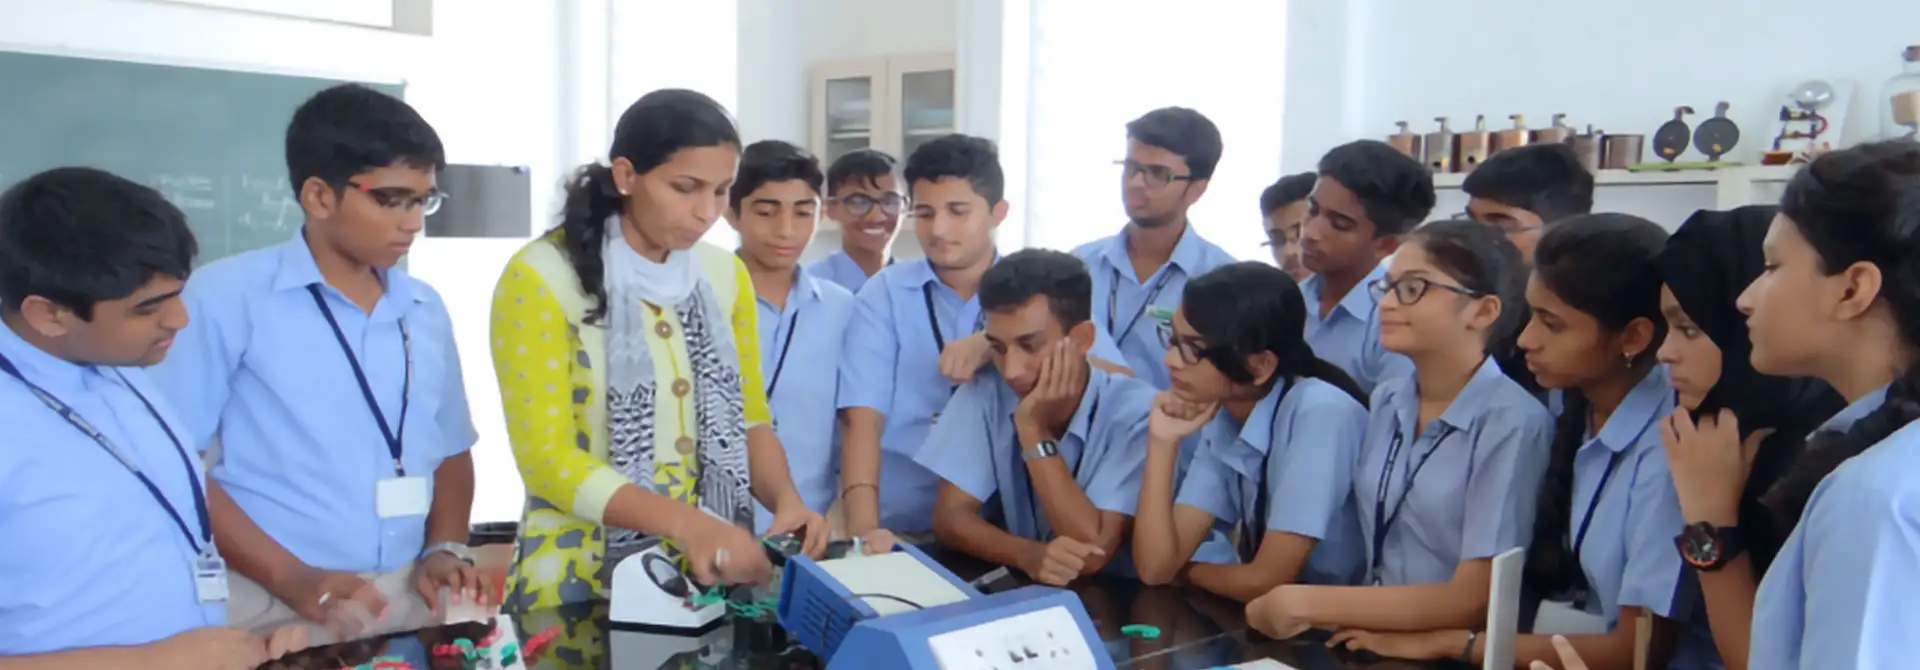 Presidency Group of Schools - Physics Lab